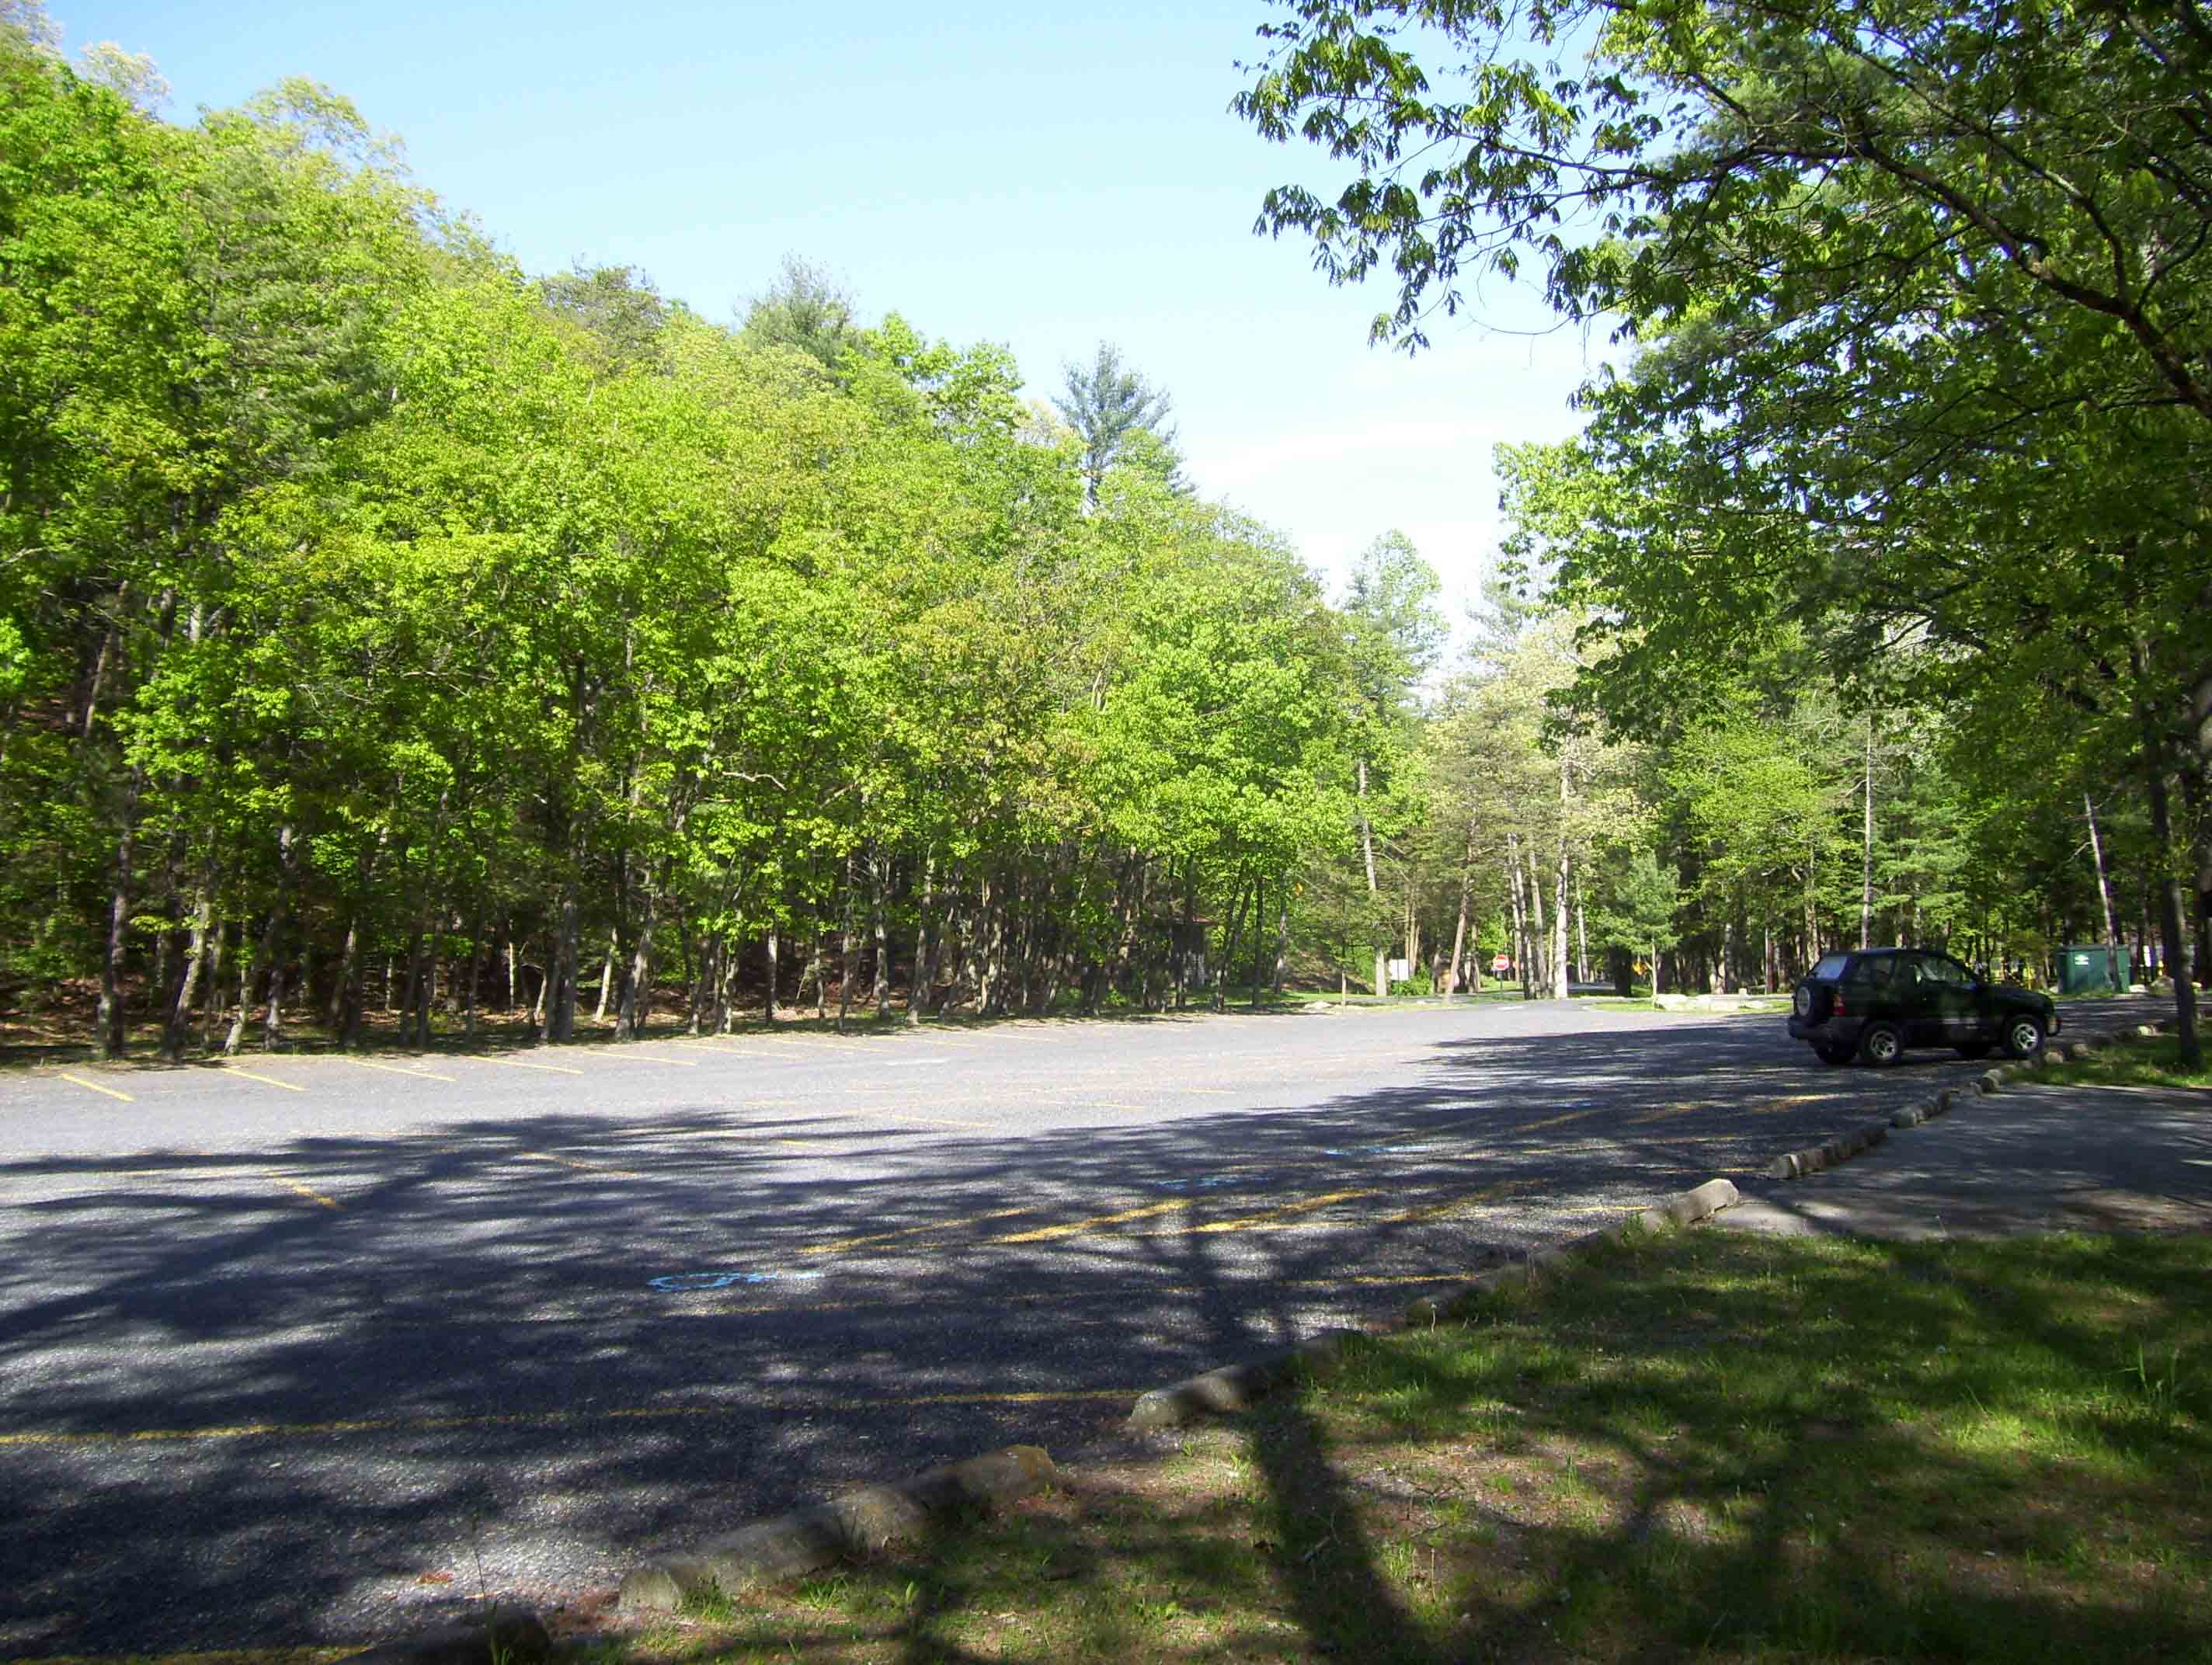 mm 19.1  Parking lot in Caledonia State Park. The trail passes very close to this.  Courtesy dlcul@conncoll.edu